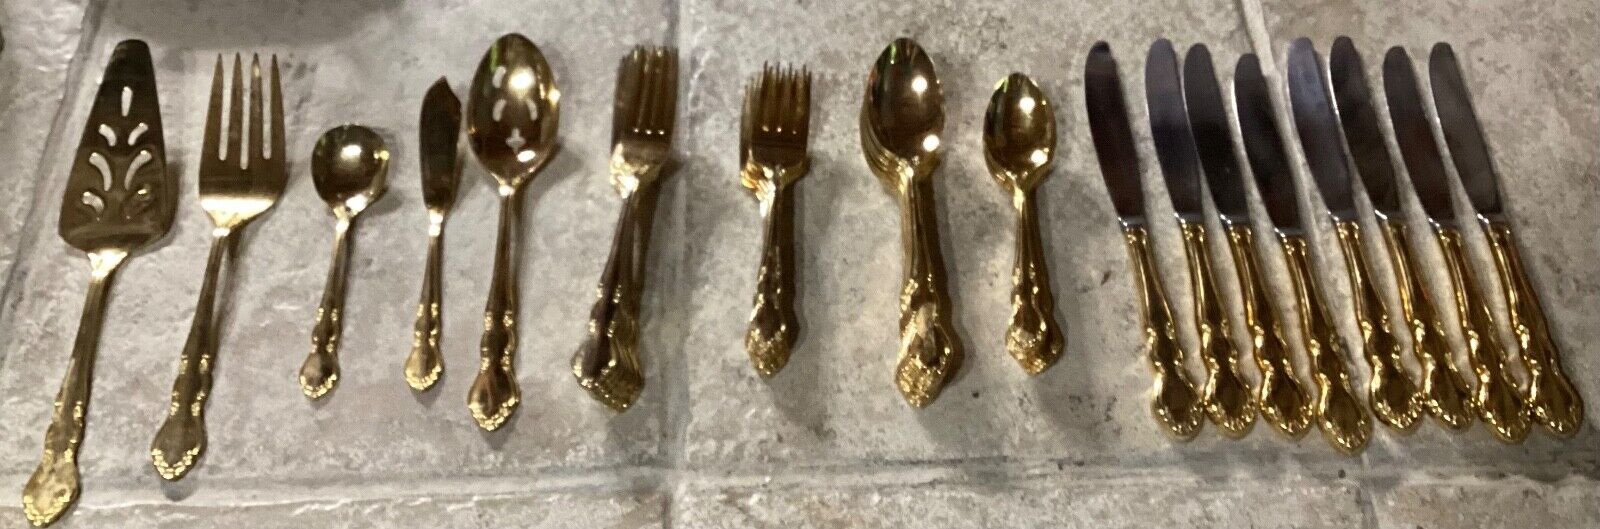 Lot of 45 ~ SUPREME CUTLERY Stainless Flatware (Japan) Gold Tone Silverware